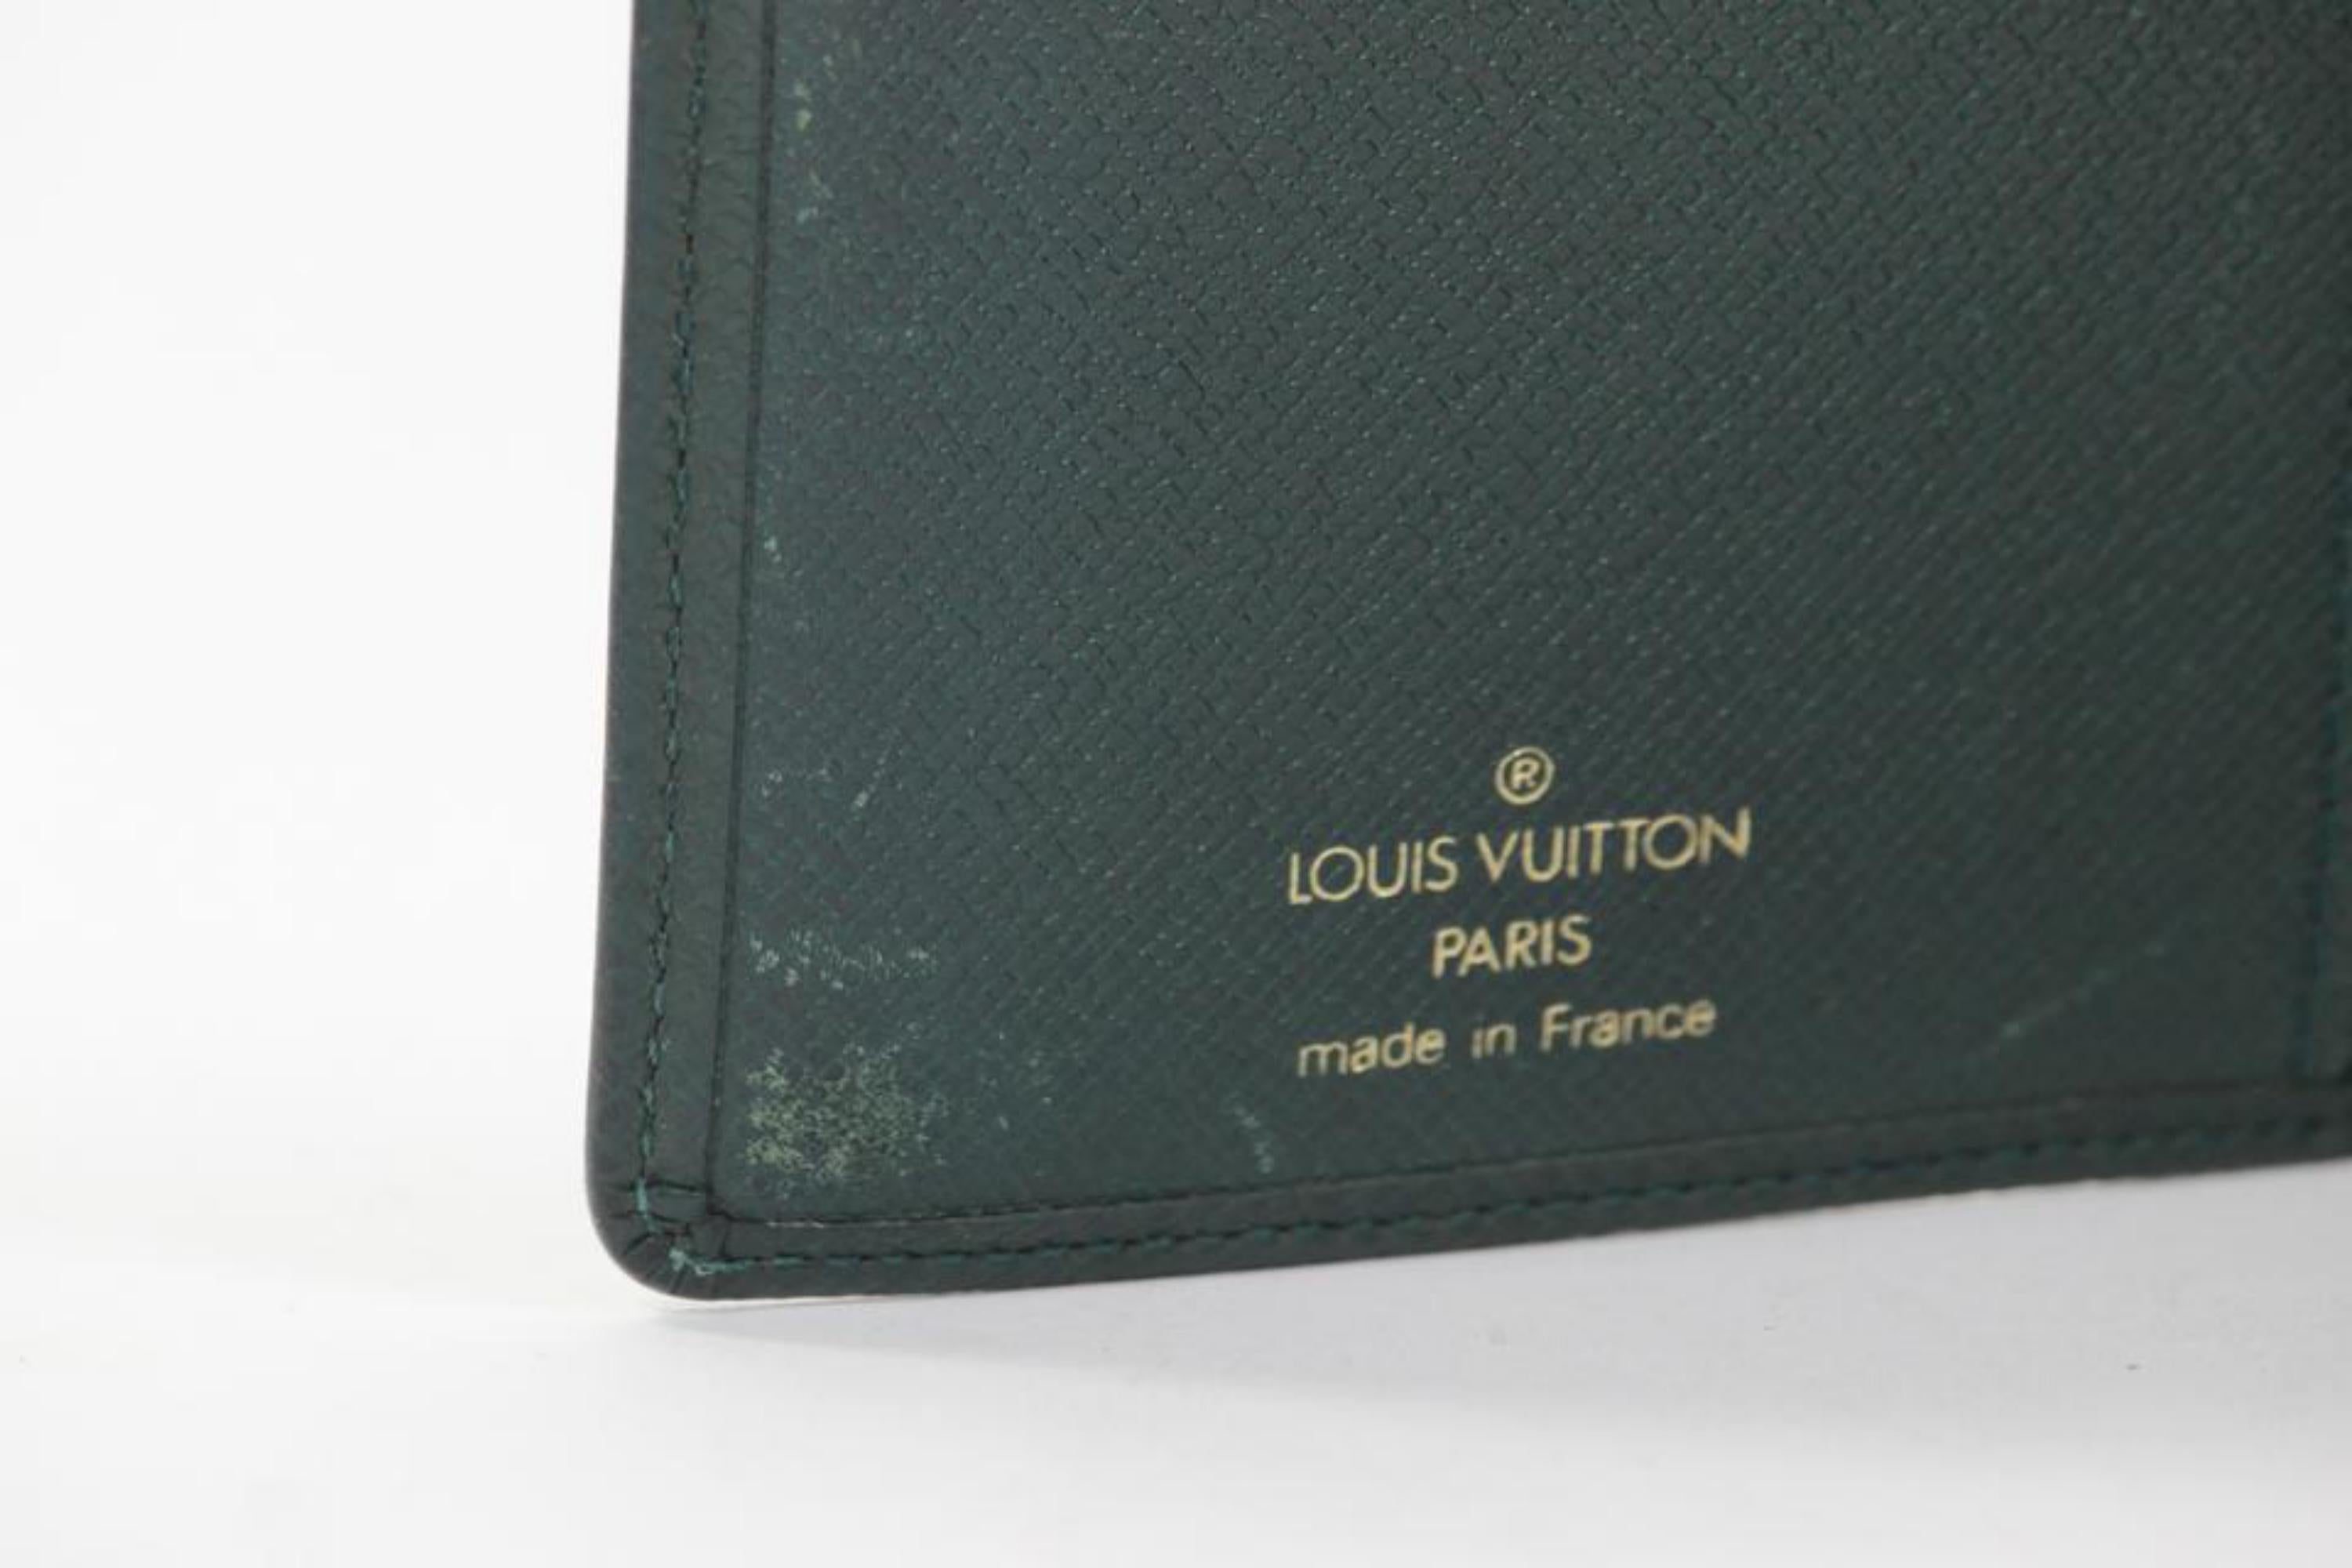 Louis Vuitton Dark Green Taiga Leather Brazza Wallet Long Card Holder 16lv1103 For Sale 2